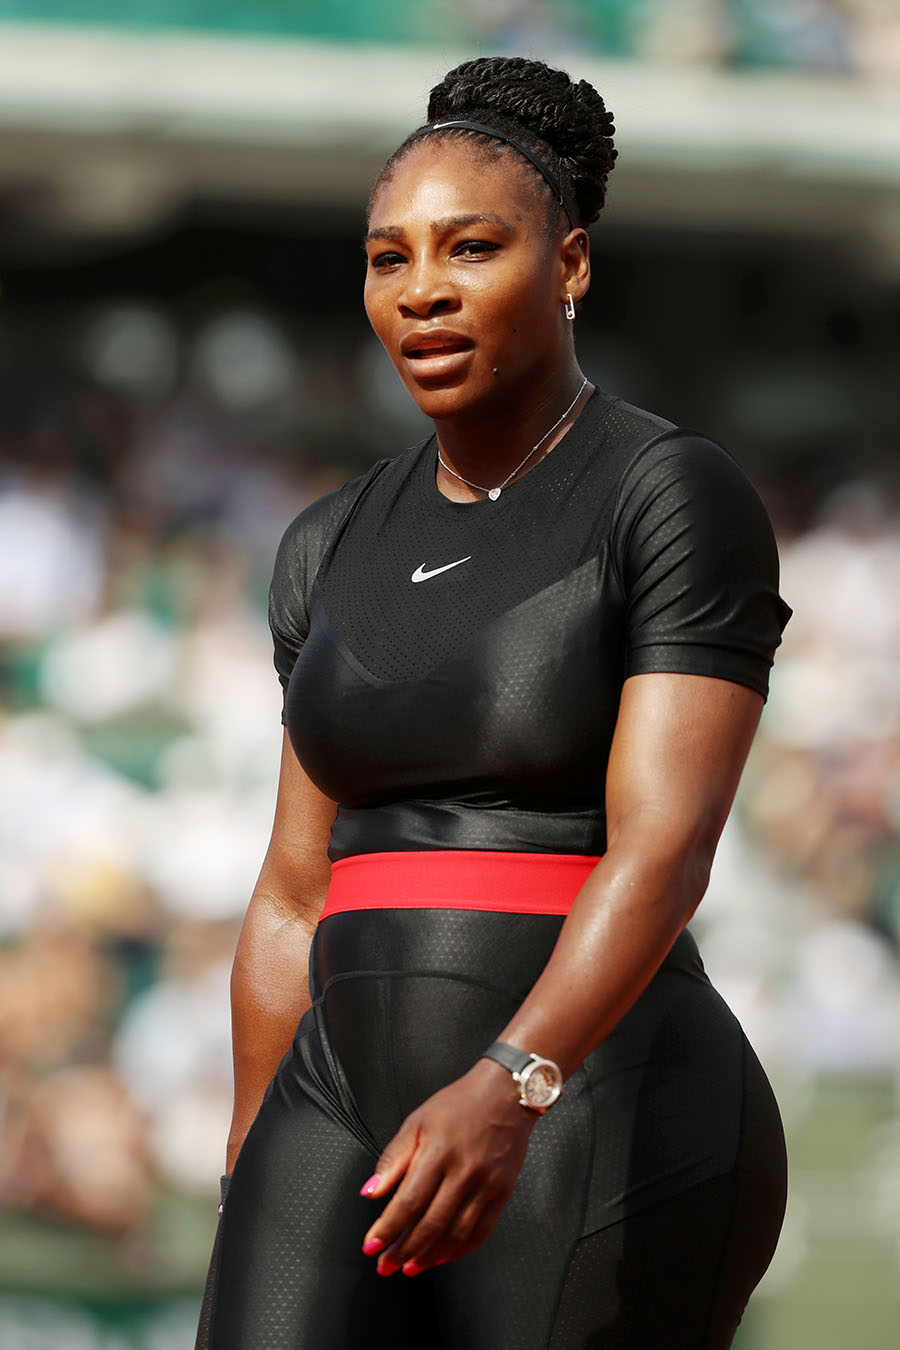 Serena Williams Responds to French Open Ban On Wearing Catsuits ...